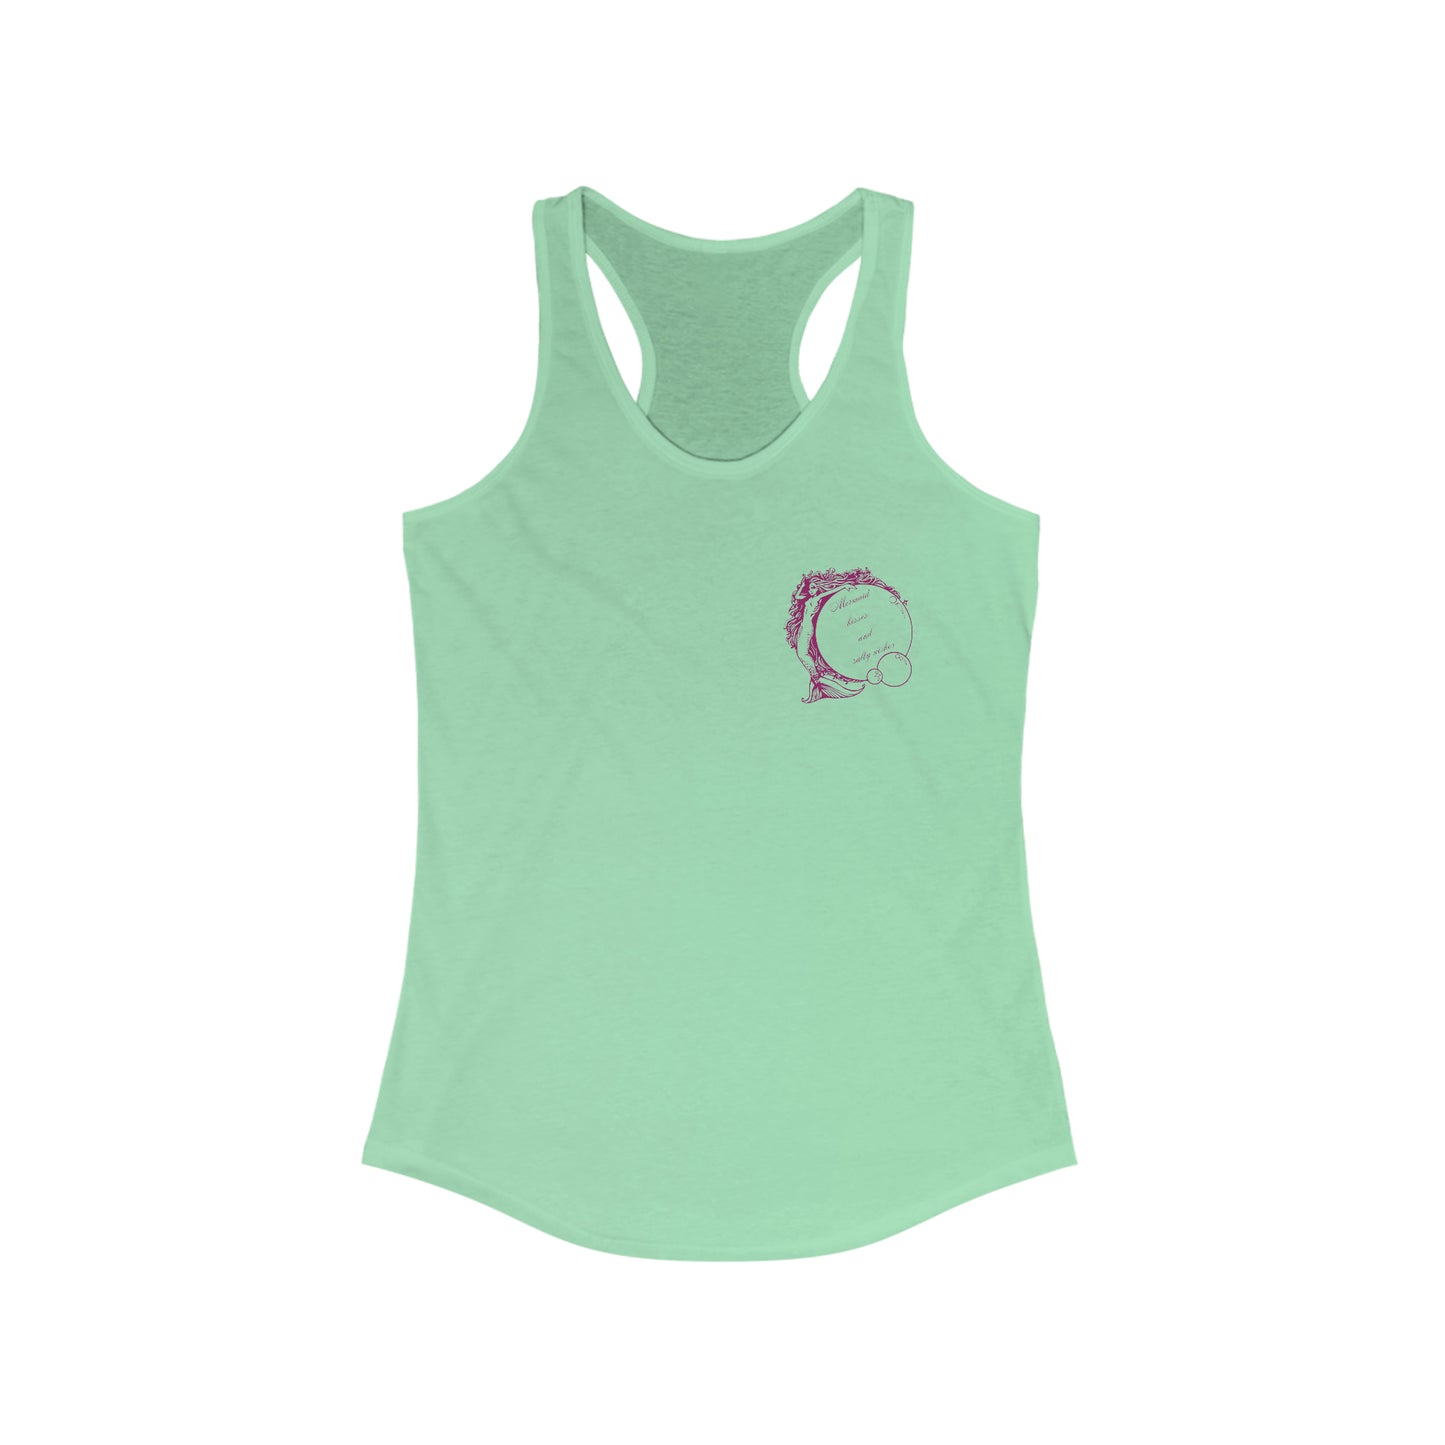 ‘Mermaid kisses and Salty Wishes’ Printed Front & Back. Women's Ideal Racerback Tank